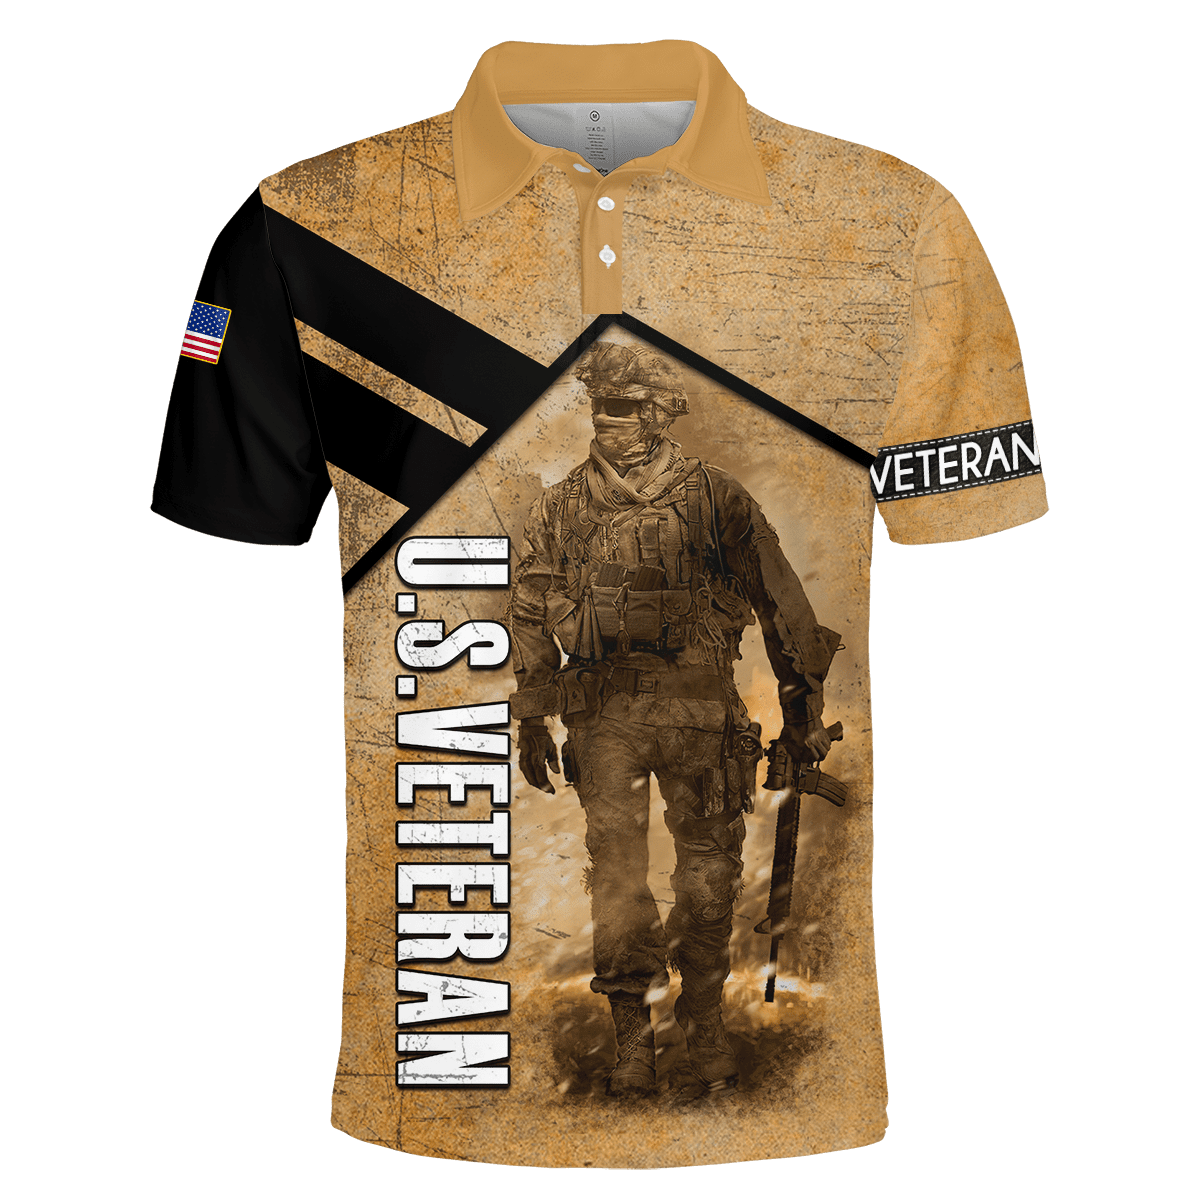 US Veteran - All Gave Some Some Gave All Unisex Shirts